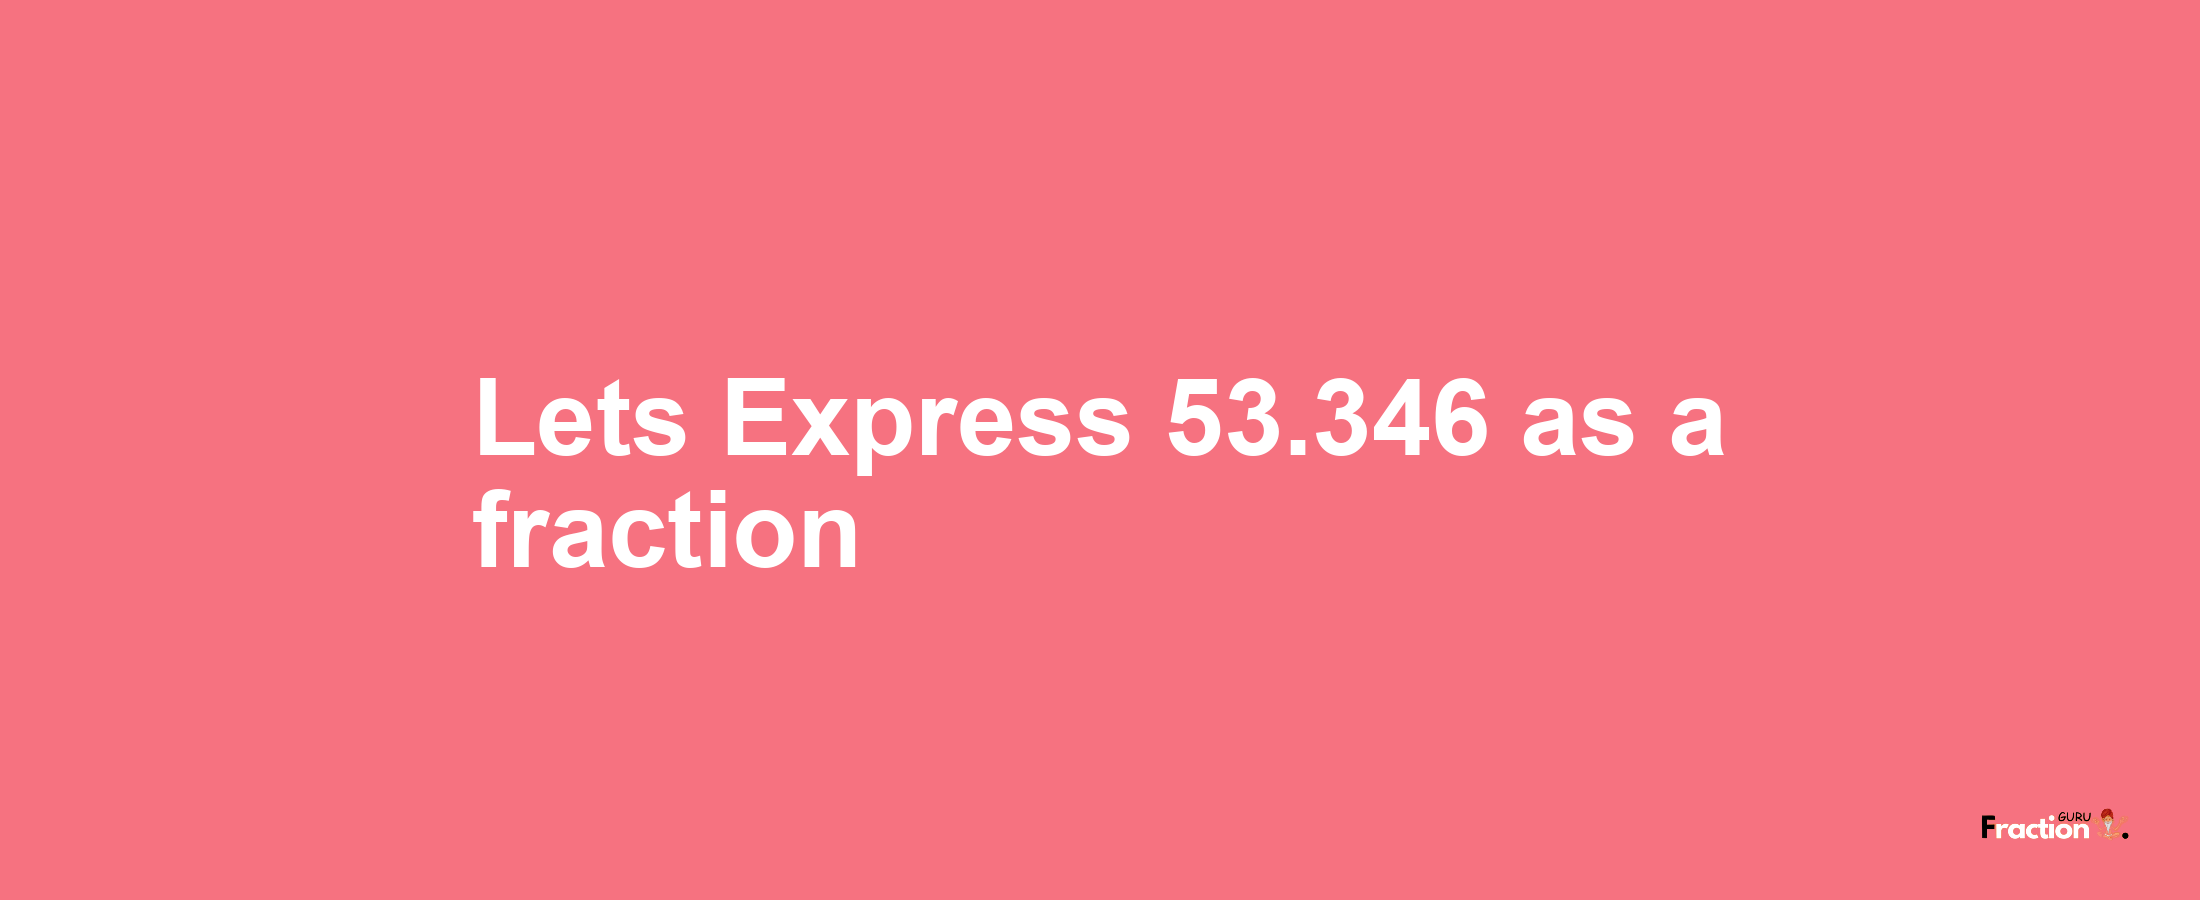 Lets Express 53.346 as afraction